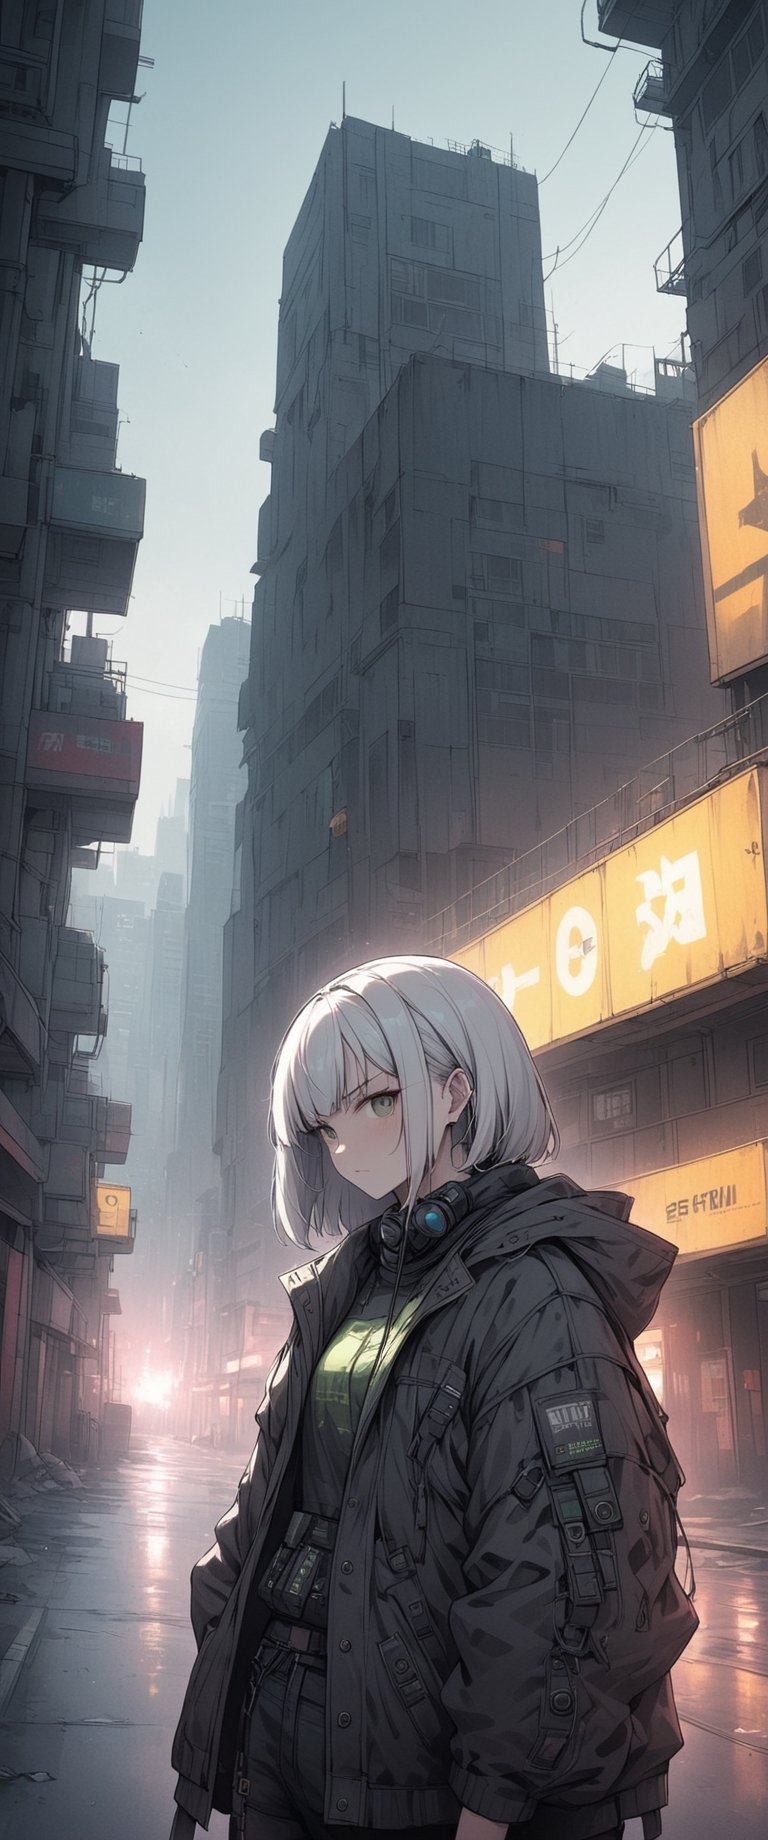 There is a woman with white hair and  a gas mask and an umbrella on the street, post apocalyptic Tokyo, set in post apocalyptic Tokyo, gloomy apocalyptic style, cyberpunk photo, anime style mixed with Fujifilm, Cyberpunk Hiroshima, hyperrealistic cyberpunk style, cyberpunk streetwear, cyberpunk grunge, en cyberpunk aesthetic, cyberpunk streets in japan, in cyberpunk style, cyberpunk horror style, in the cyberpunk city))),angry, latex uniform, eye angle view, ,aw0k nsfwfactory,aw0k magnstyle,danknis,sooyaaa,Anime,dlwlrma,Comic Book-Style